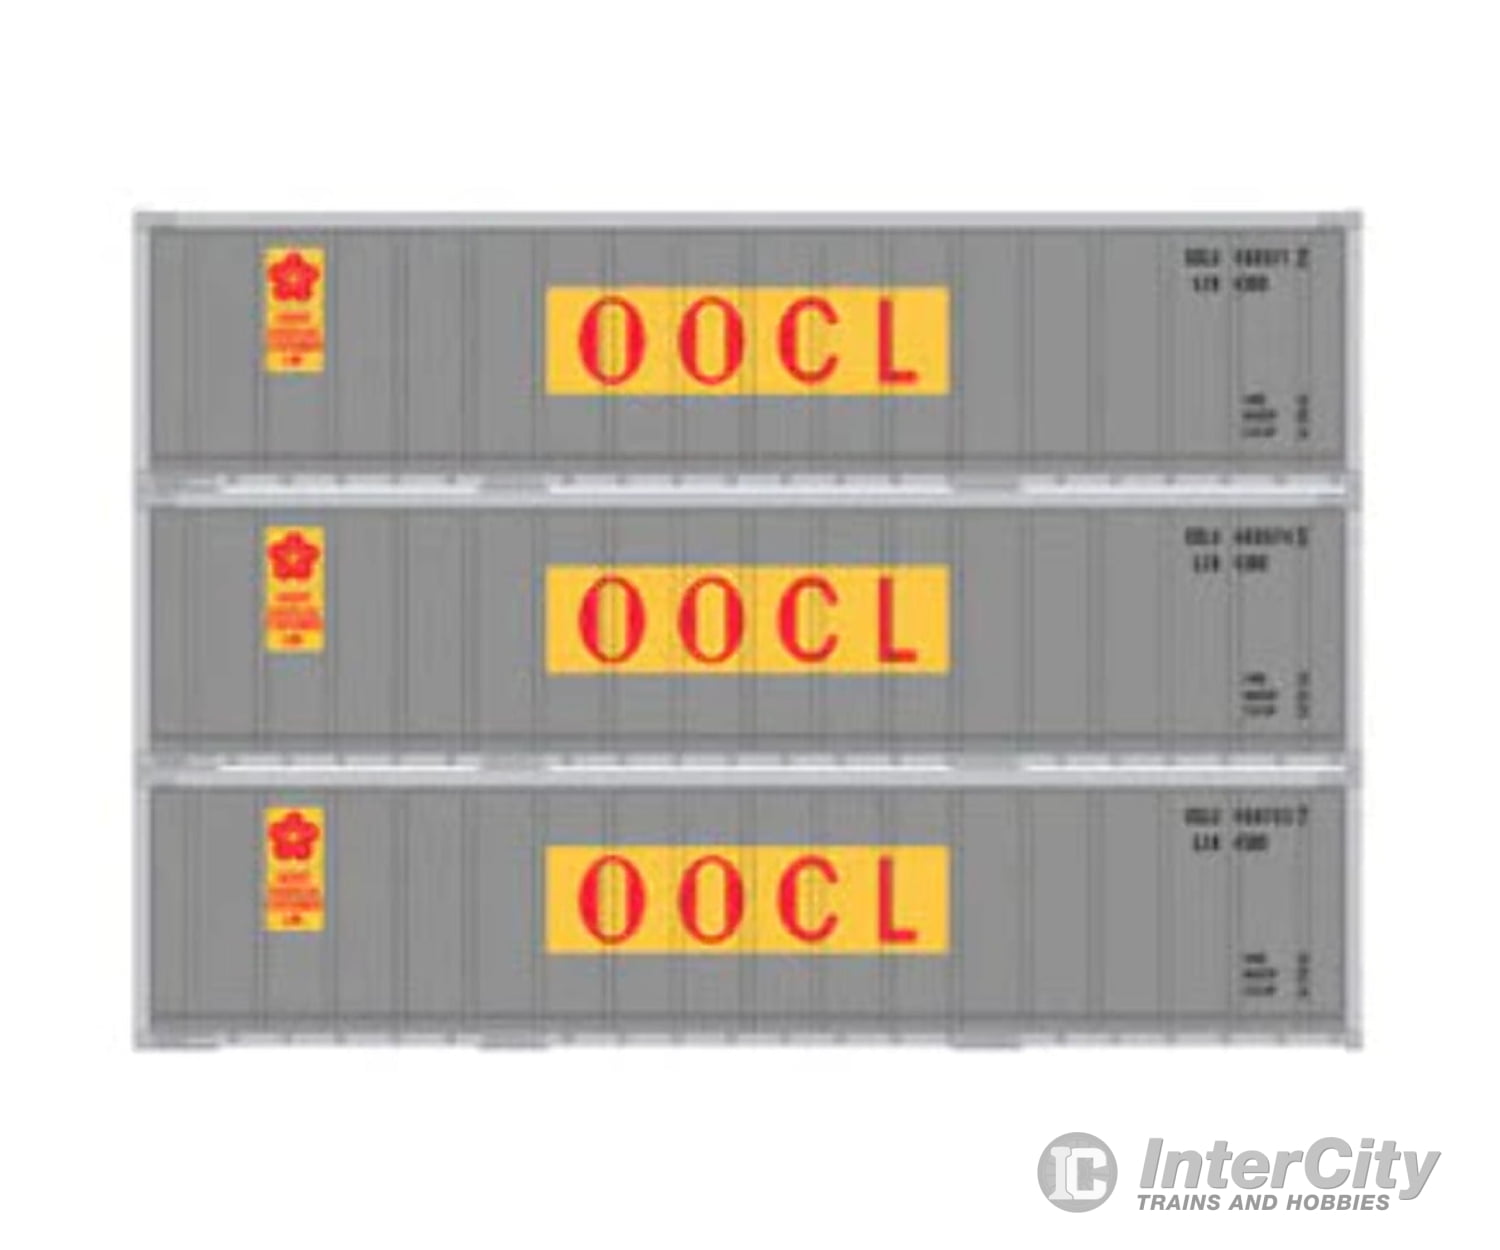 Athearn 17706 N Scale 40’ Smooth Side Container Oocl 3 Pack Freight Loads & Containers